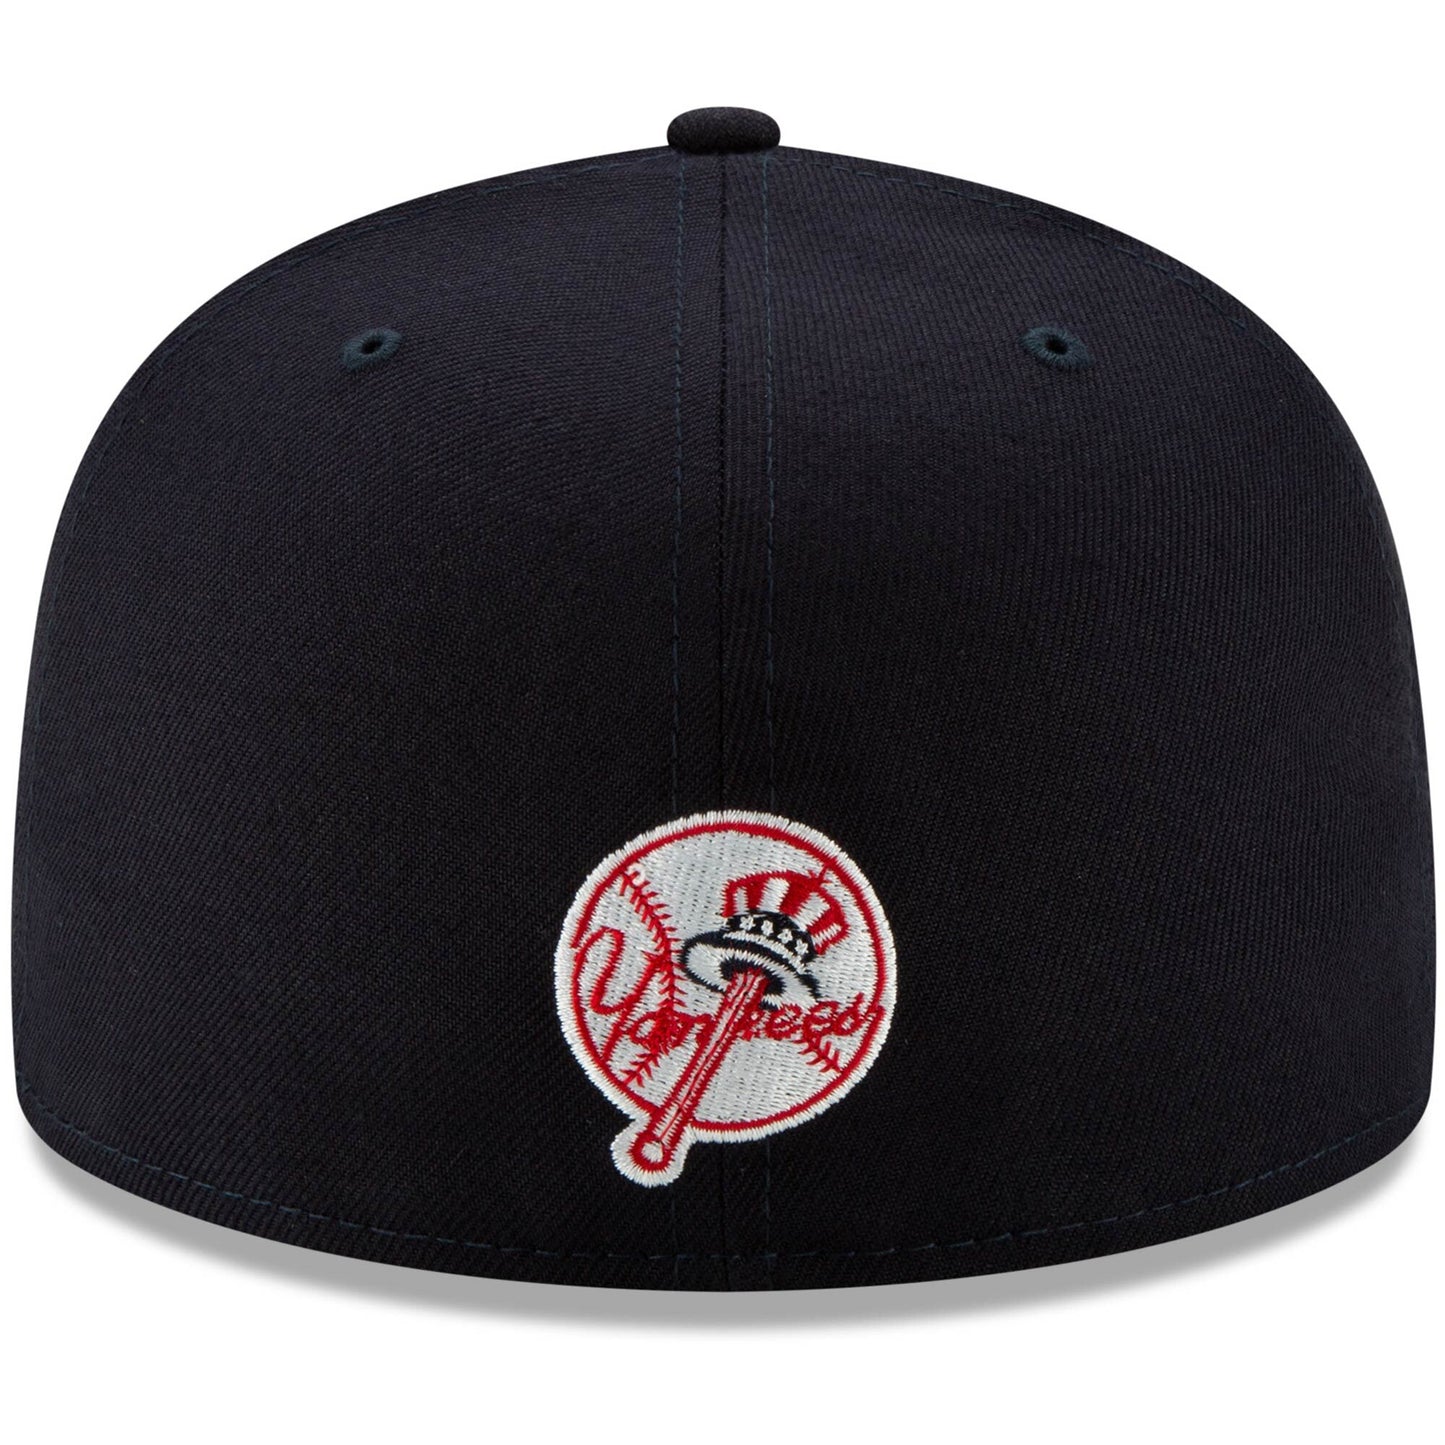 NEW YORK YANKEES LOGO ELEMENTS 5950 FITTED